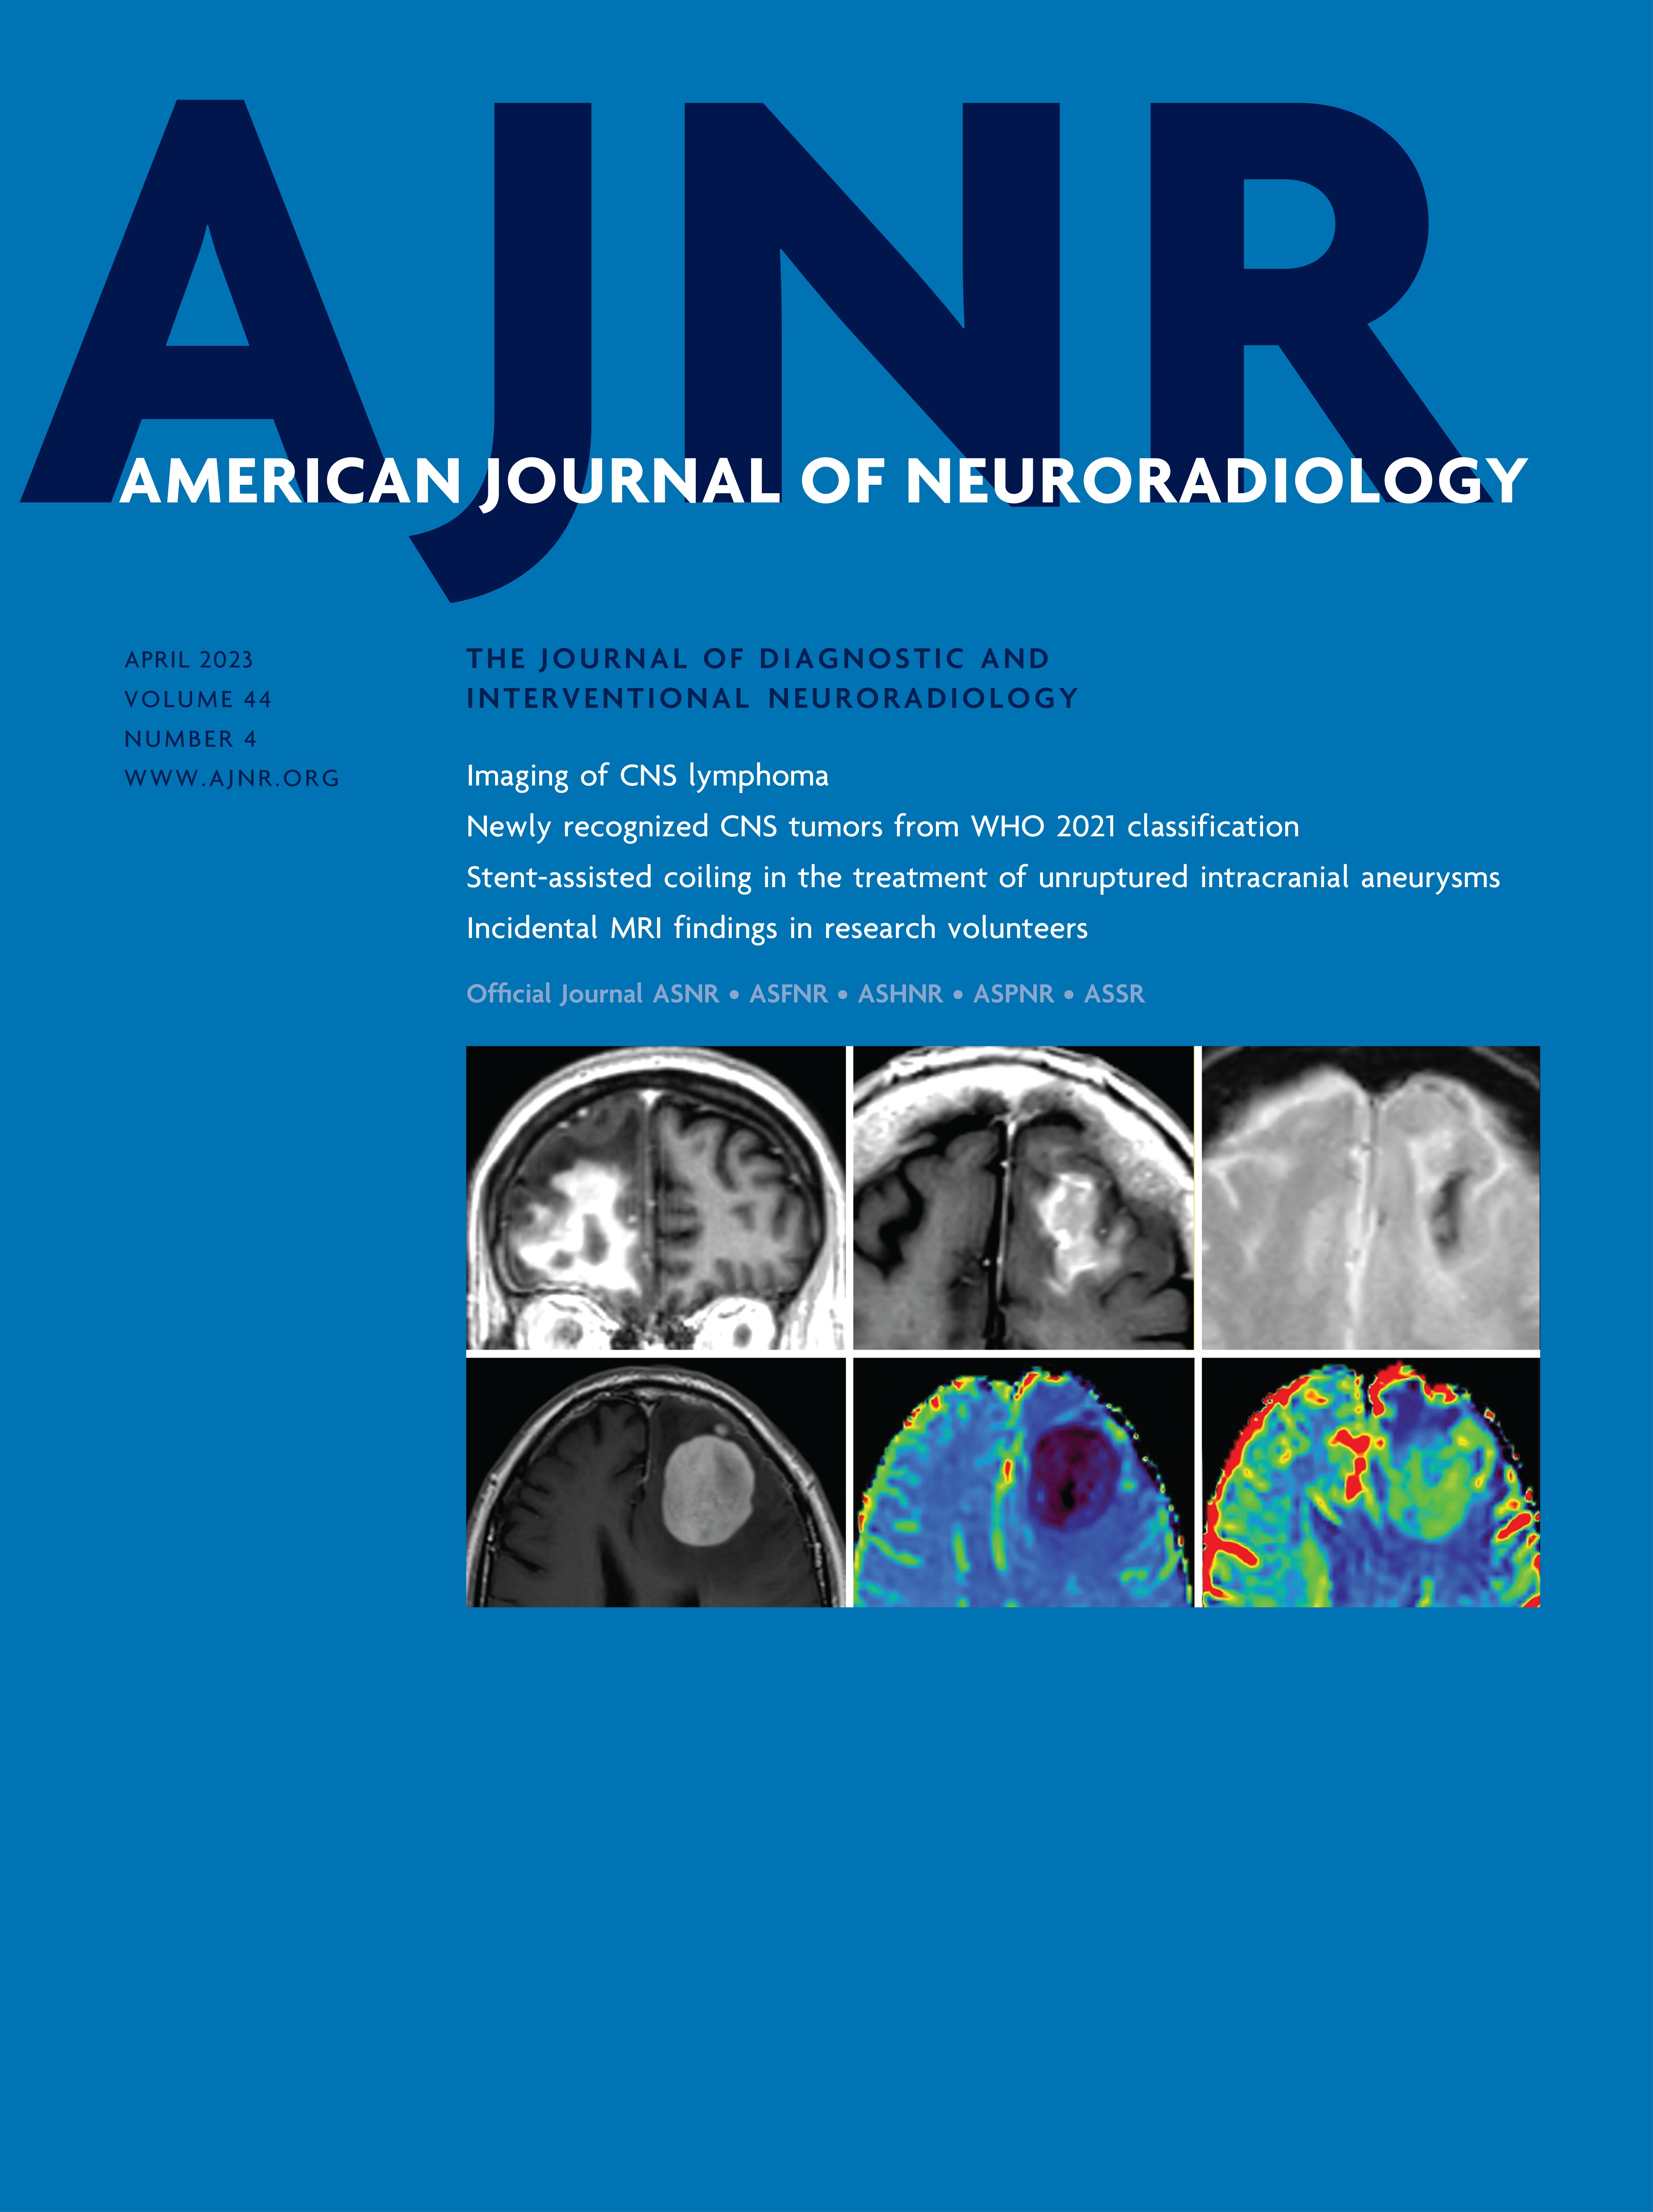 Incidental Findings from 16,400 Brain MRI Examinations of Research Volunteers [ADULT BRAIN]